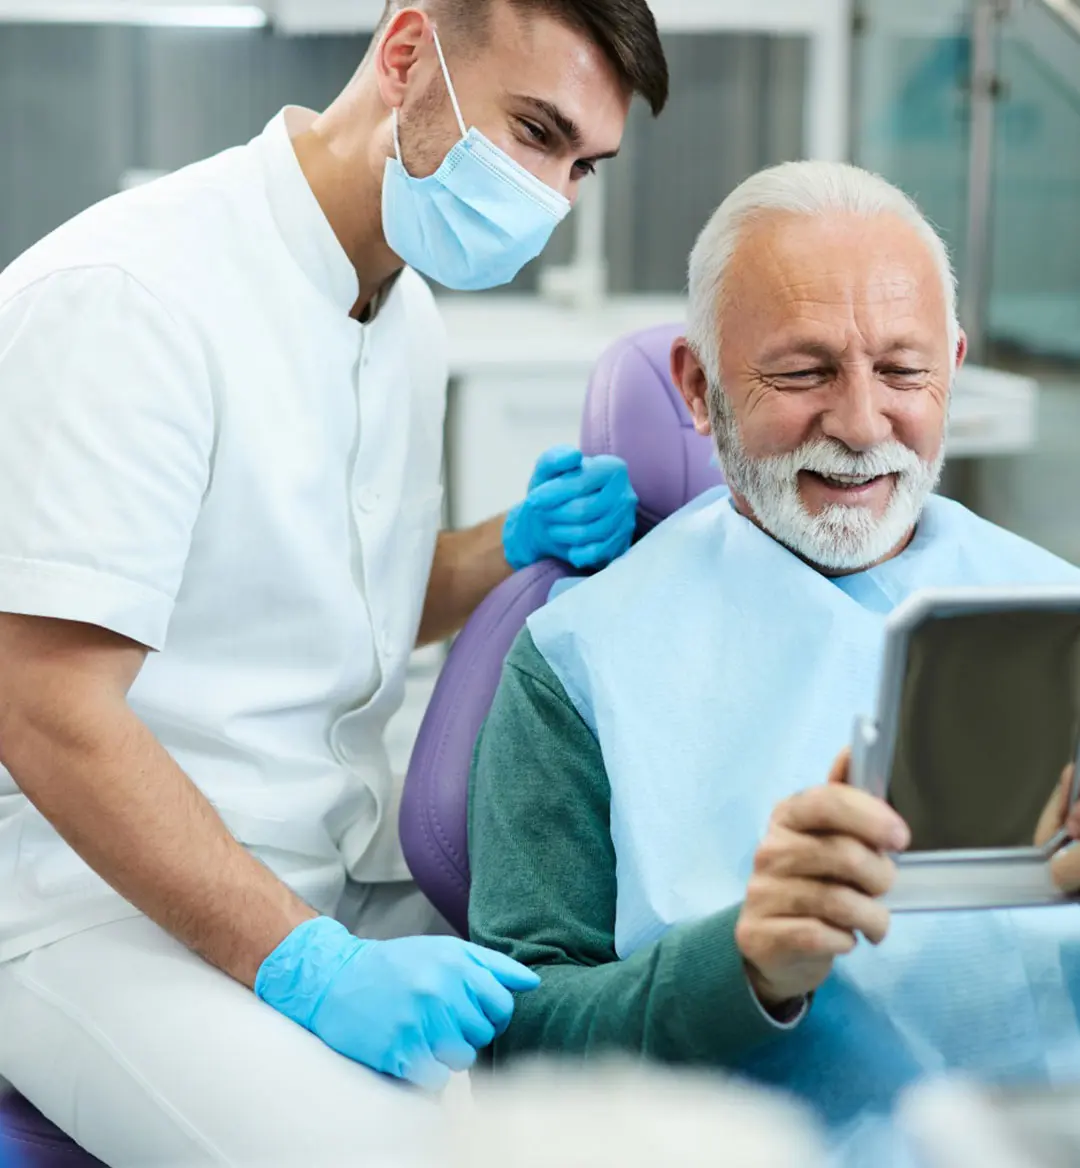 Dentist And Patient Looking At Mirror During Dental Checkup